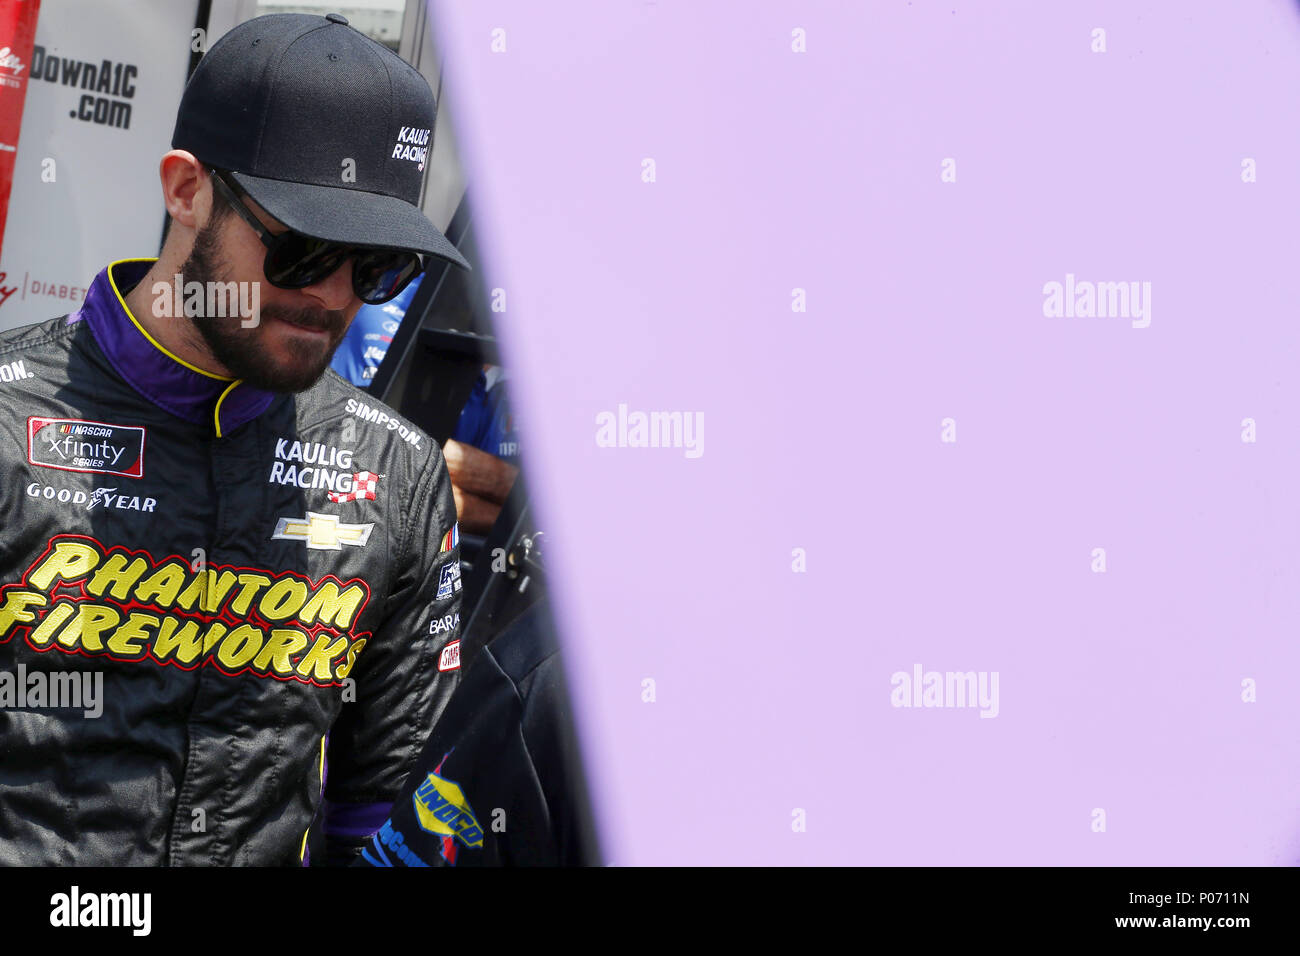 Brooklyn, Michigan, USA. 8th June, 2018. Ryan Truex (11) hangs out in the garage during practice for the LTi Printing 250 at Michigan International Speedway in Brooklyn, Michigan. Credit: Chris Owens Asp Inc/ASP/ZUMA Wire/Alamy Live News Stock Photo